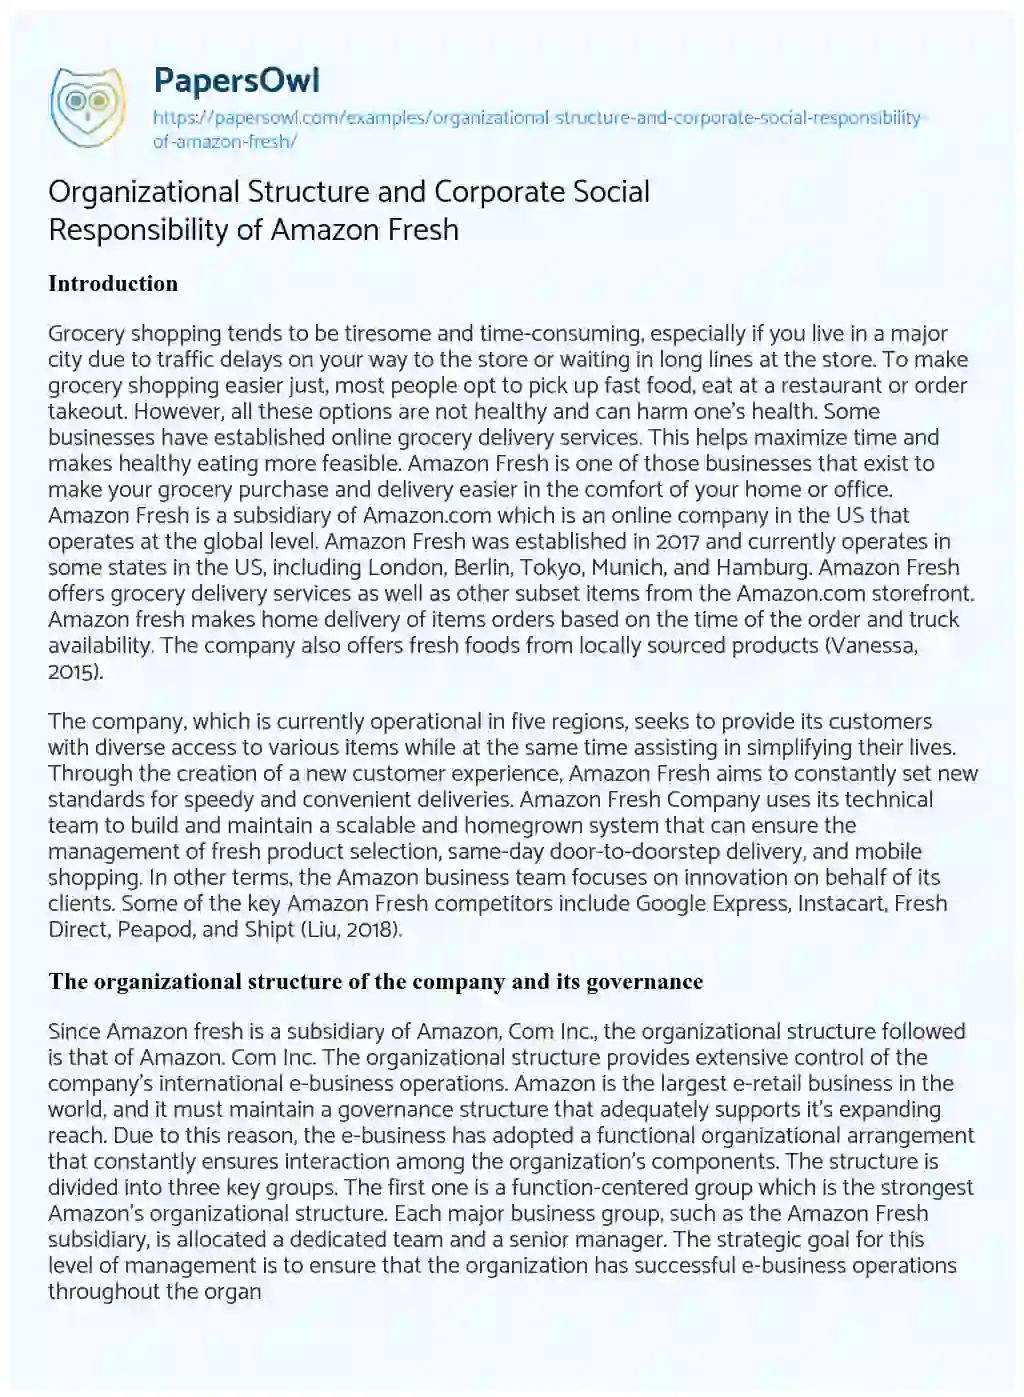 Essay on Organizational Structure and Corporate Social Responsibility of Amazon Fresh